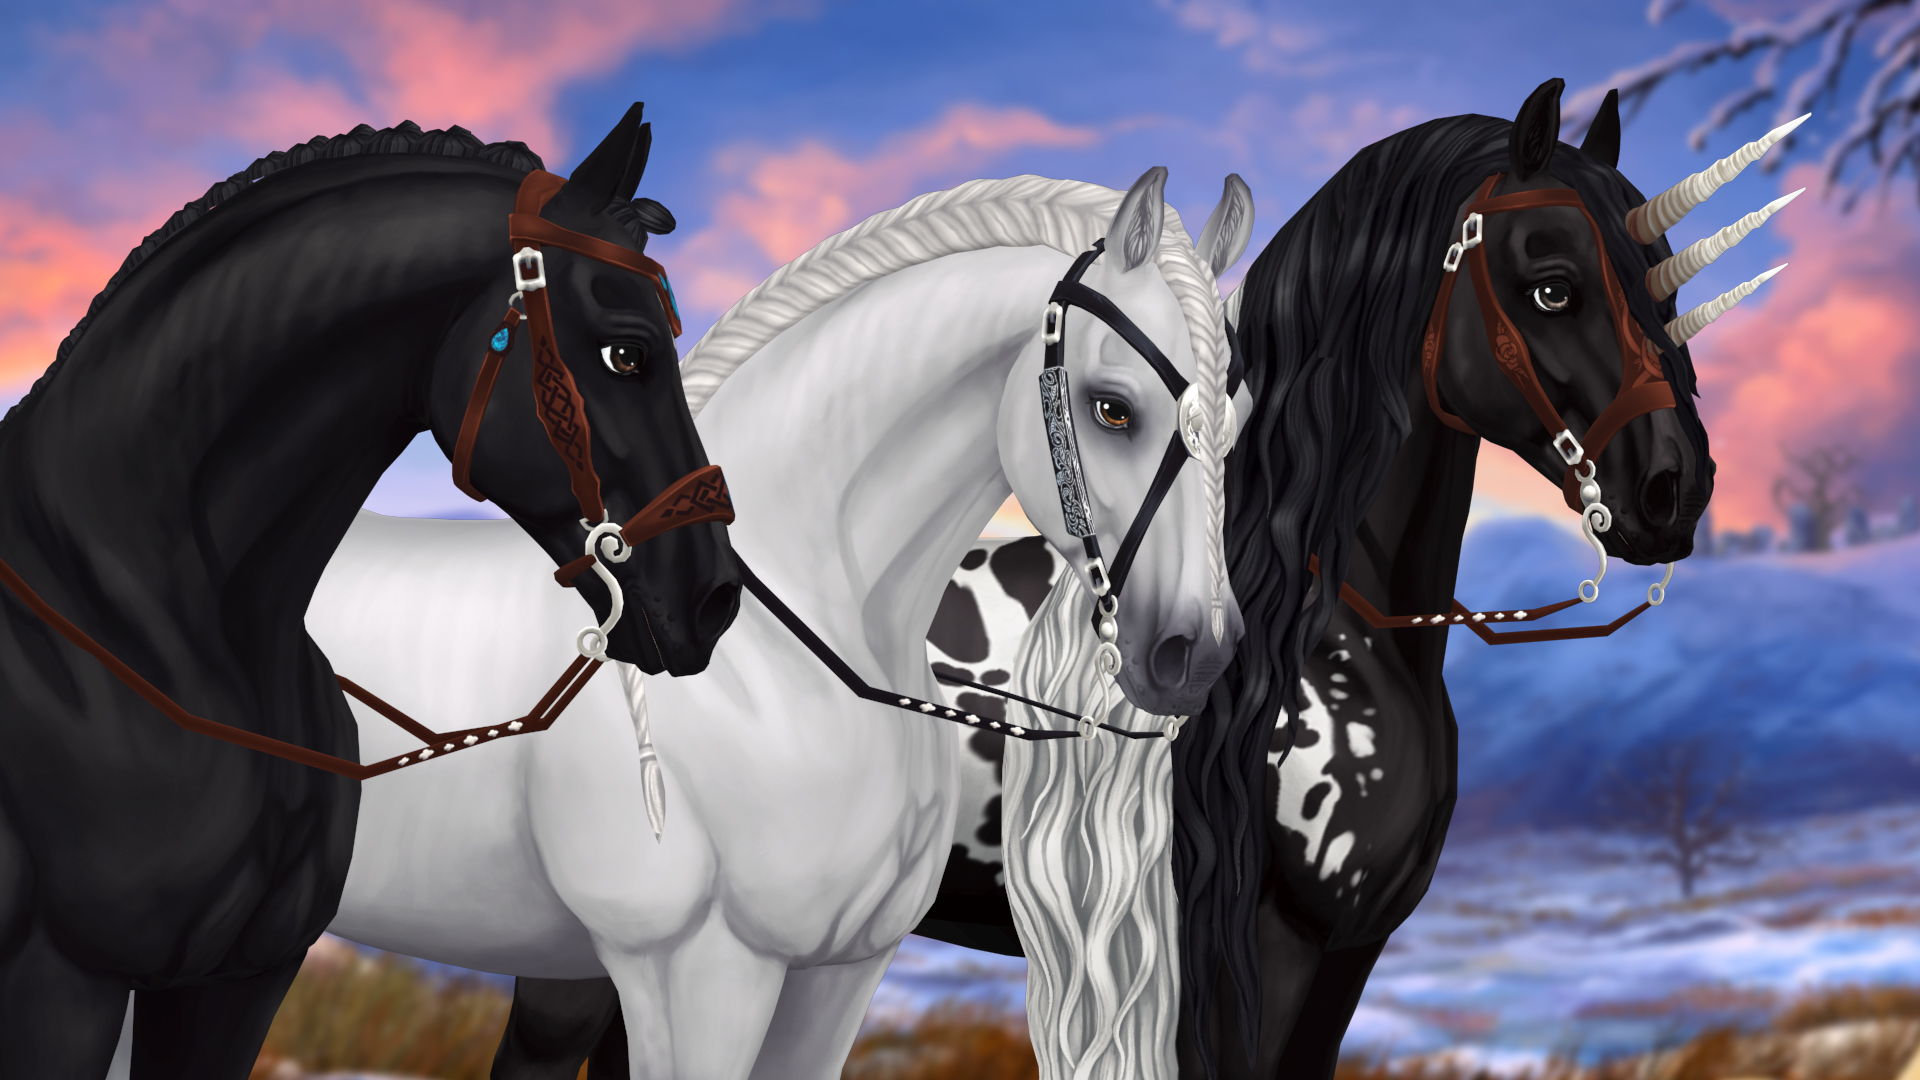 Which bridle color is your favorite?